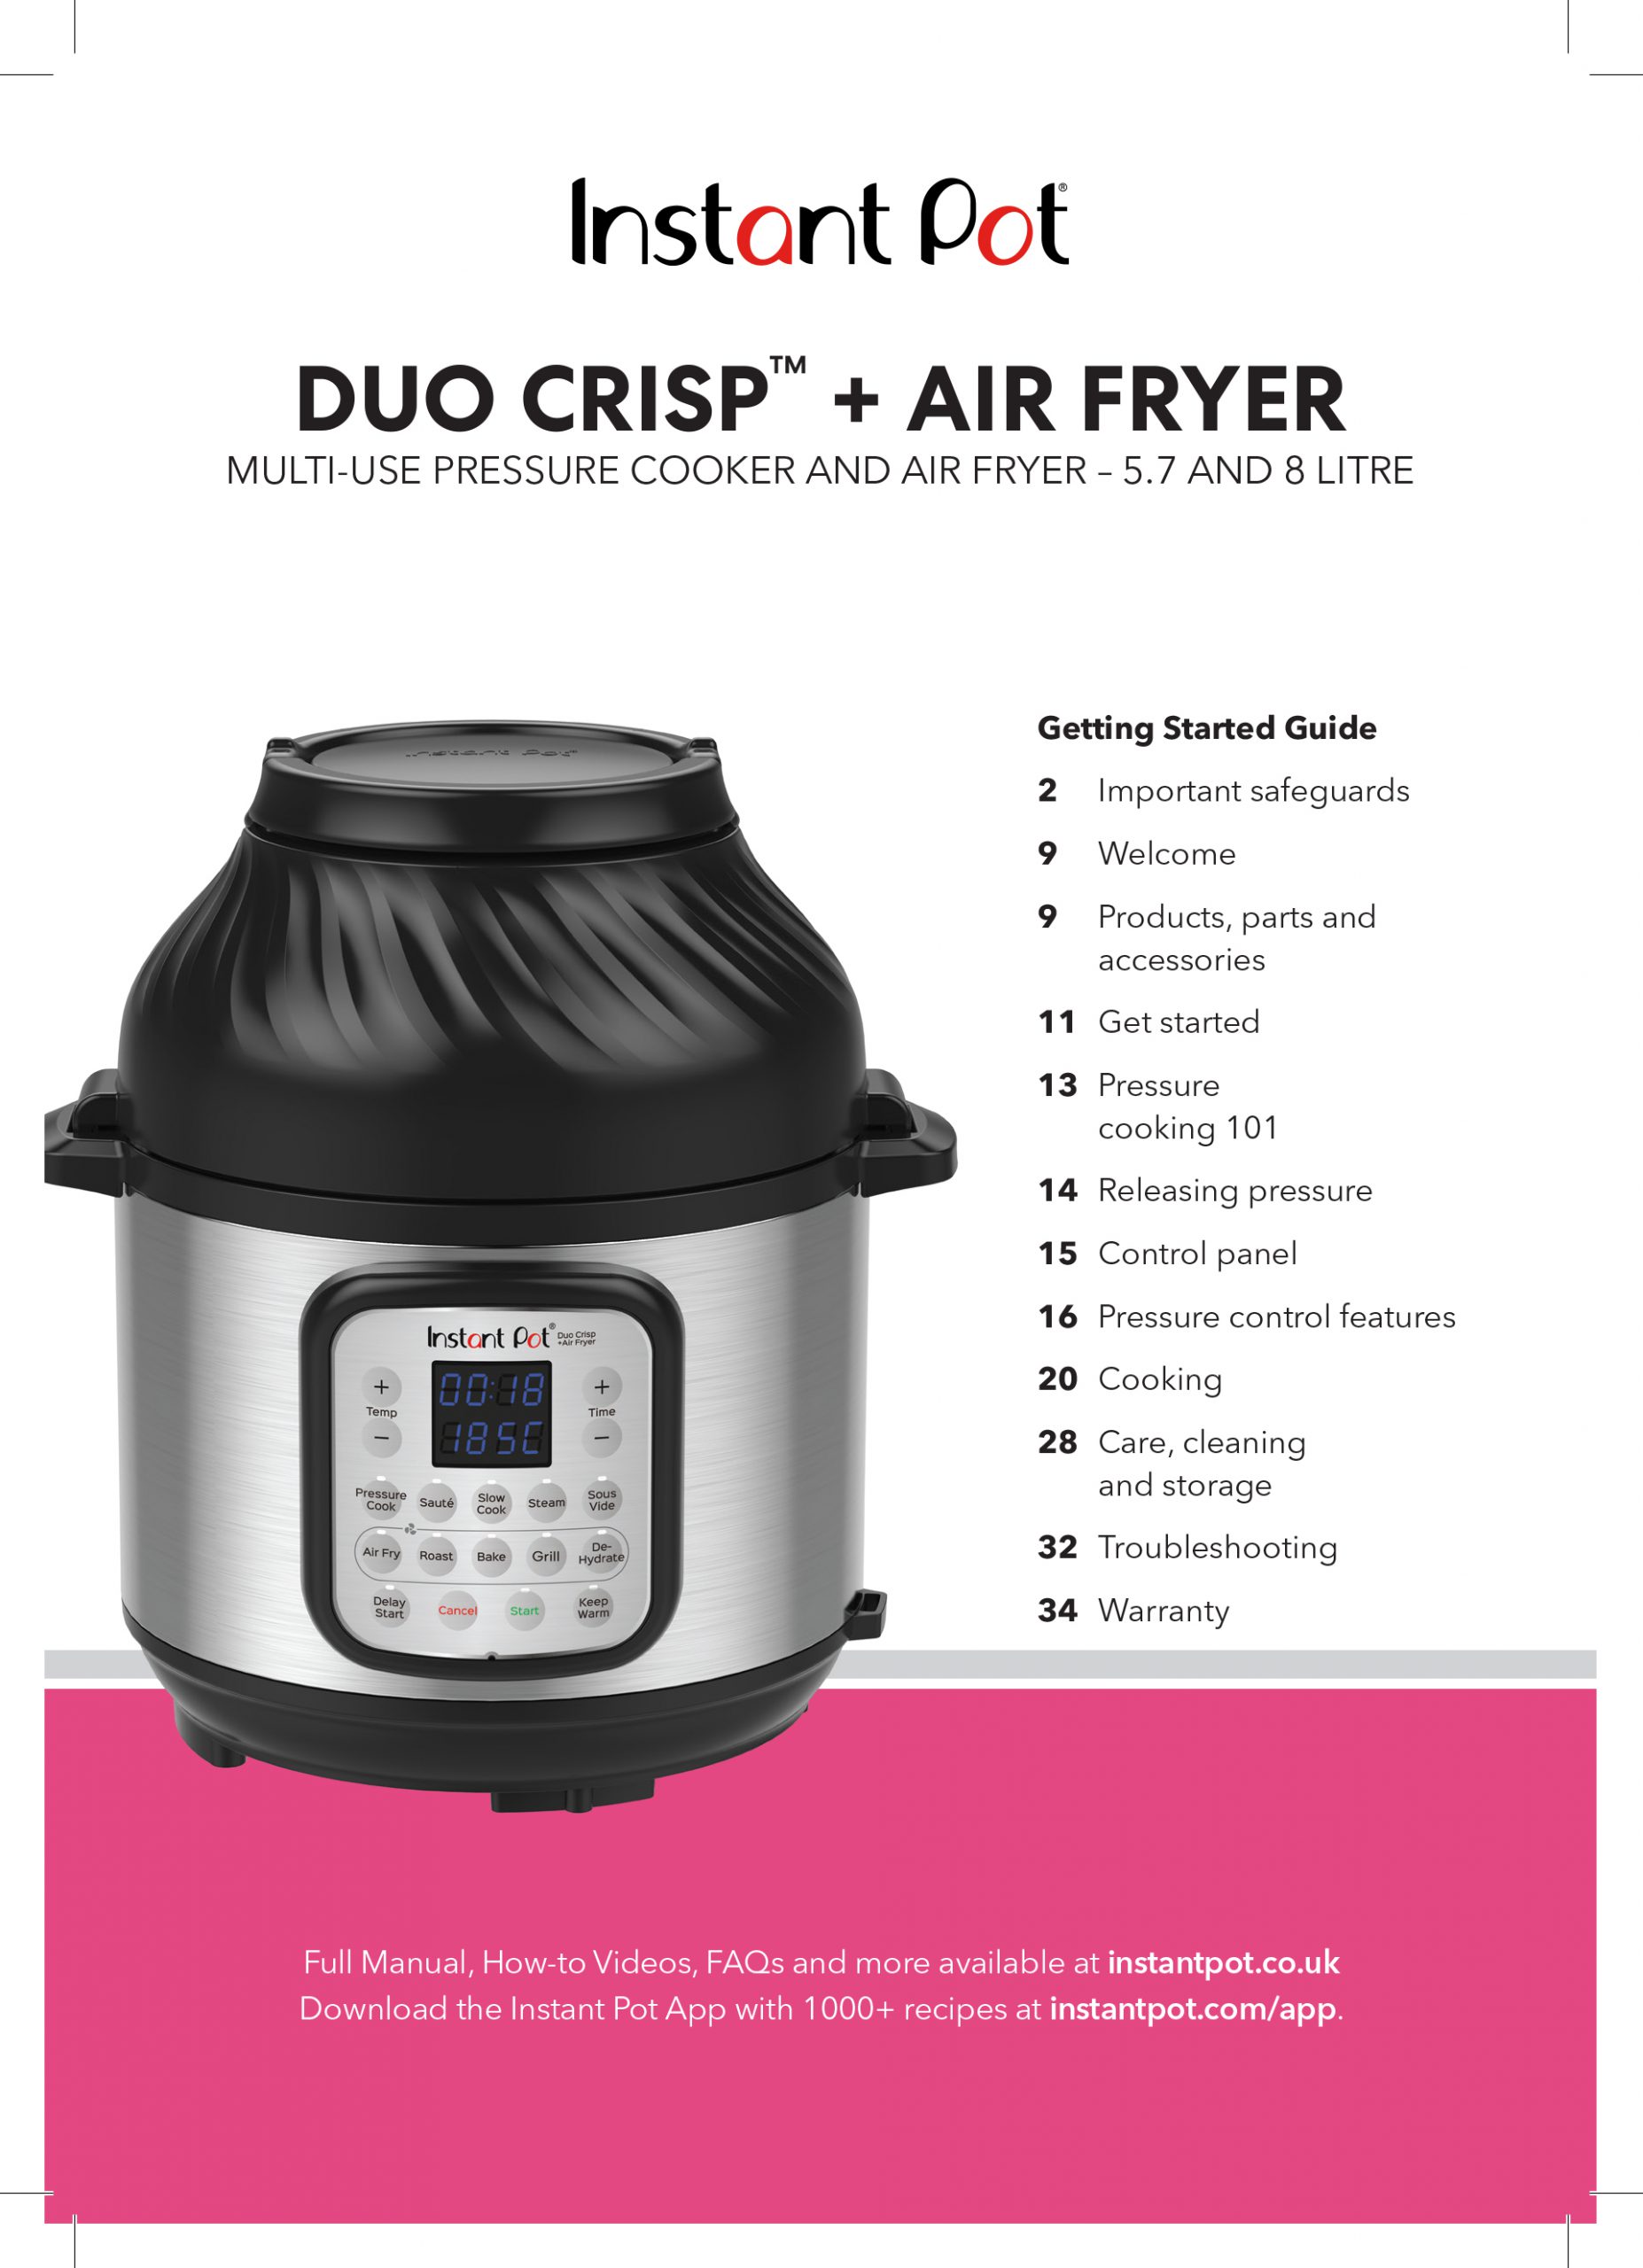  Instant Pot Duo Crisp Pressure Cooker 11 in 1, 8 Qt with Air  Fryer, Roast, Bake, Dehydrate and more & Genuine Instant Pot Tempered Glass  lid, Clear 10 Inch (26 cm)